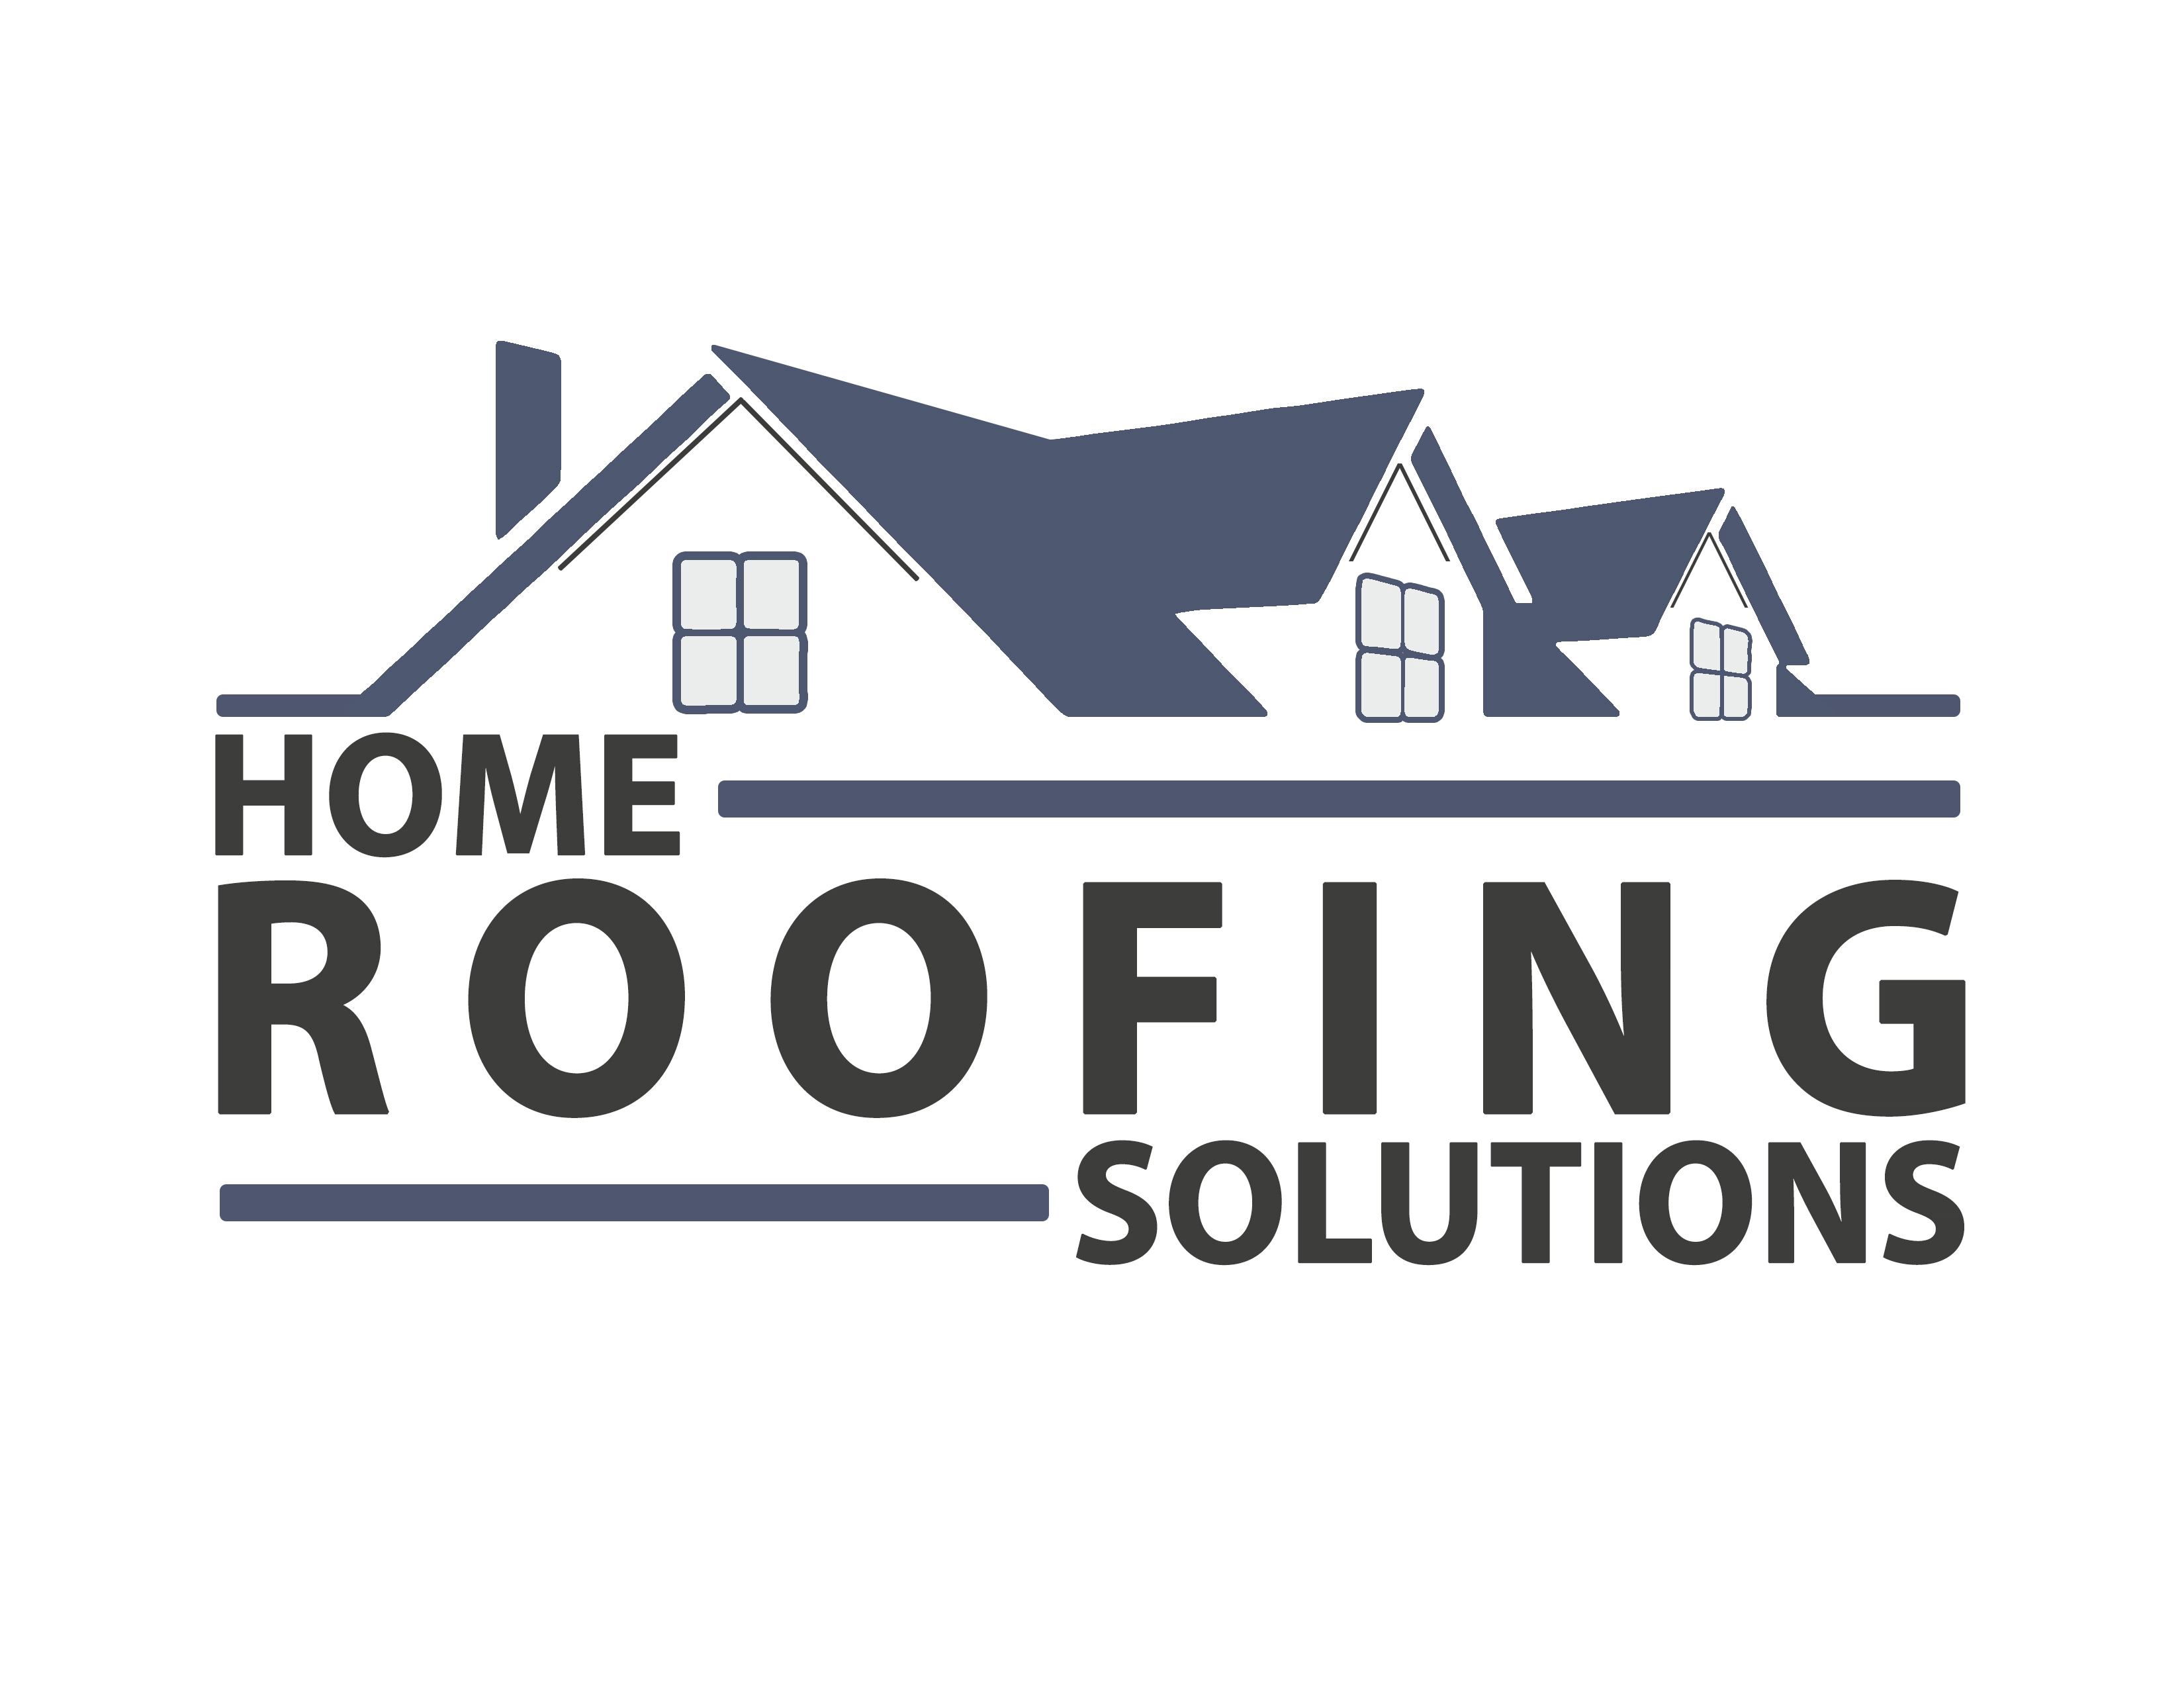 Home Roofing Solutions Logo